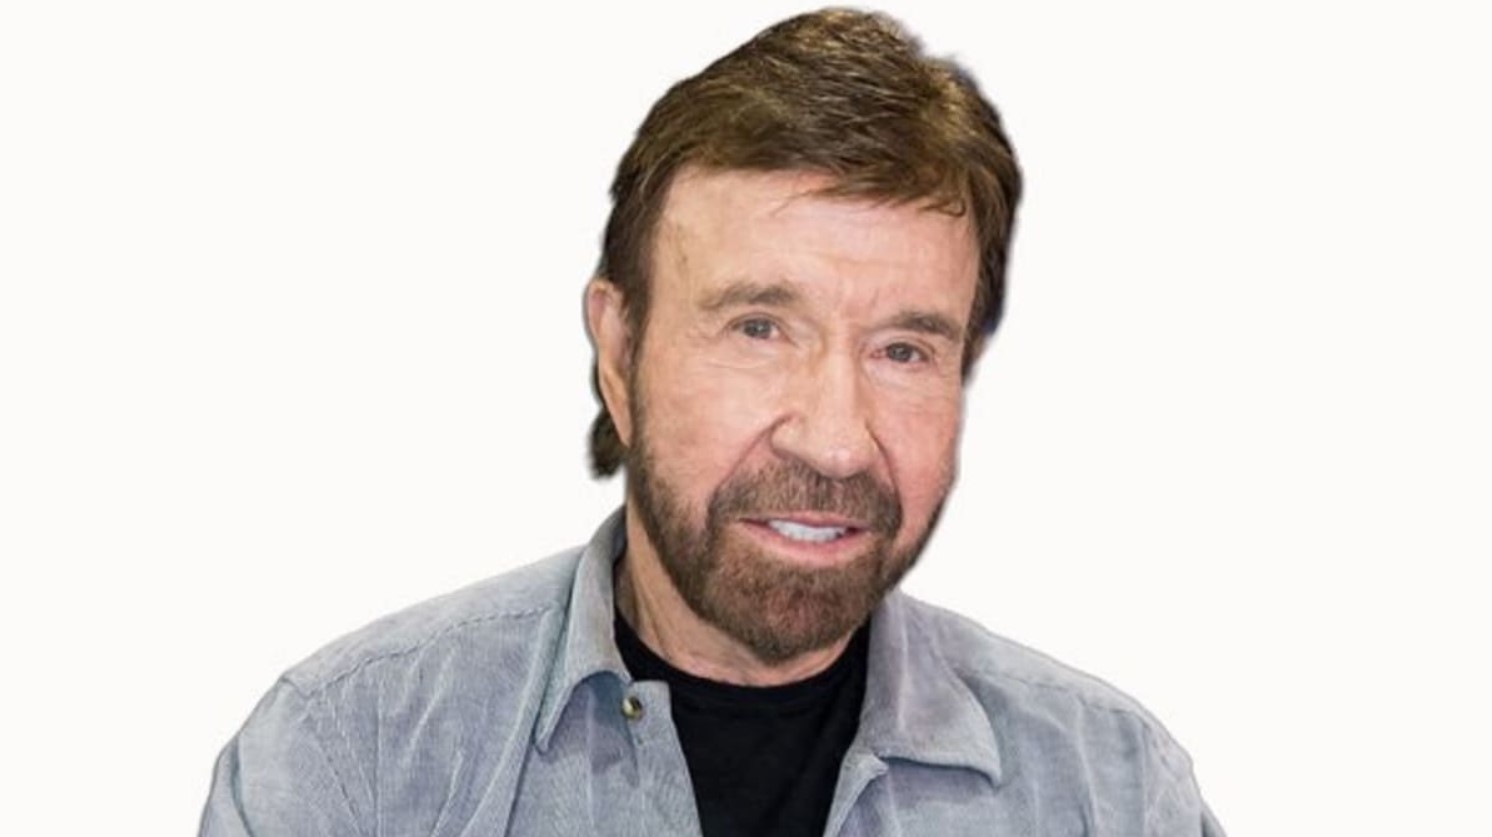 Chuck Norris picture